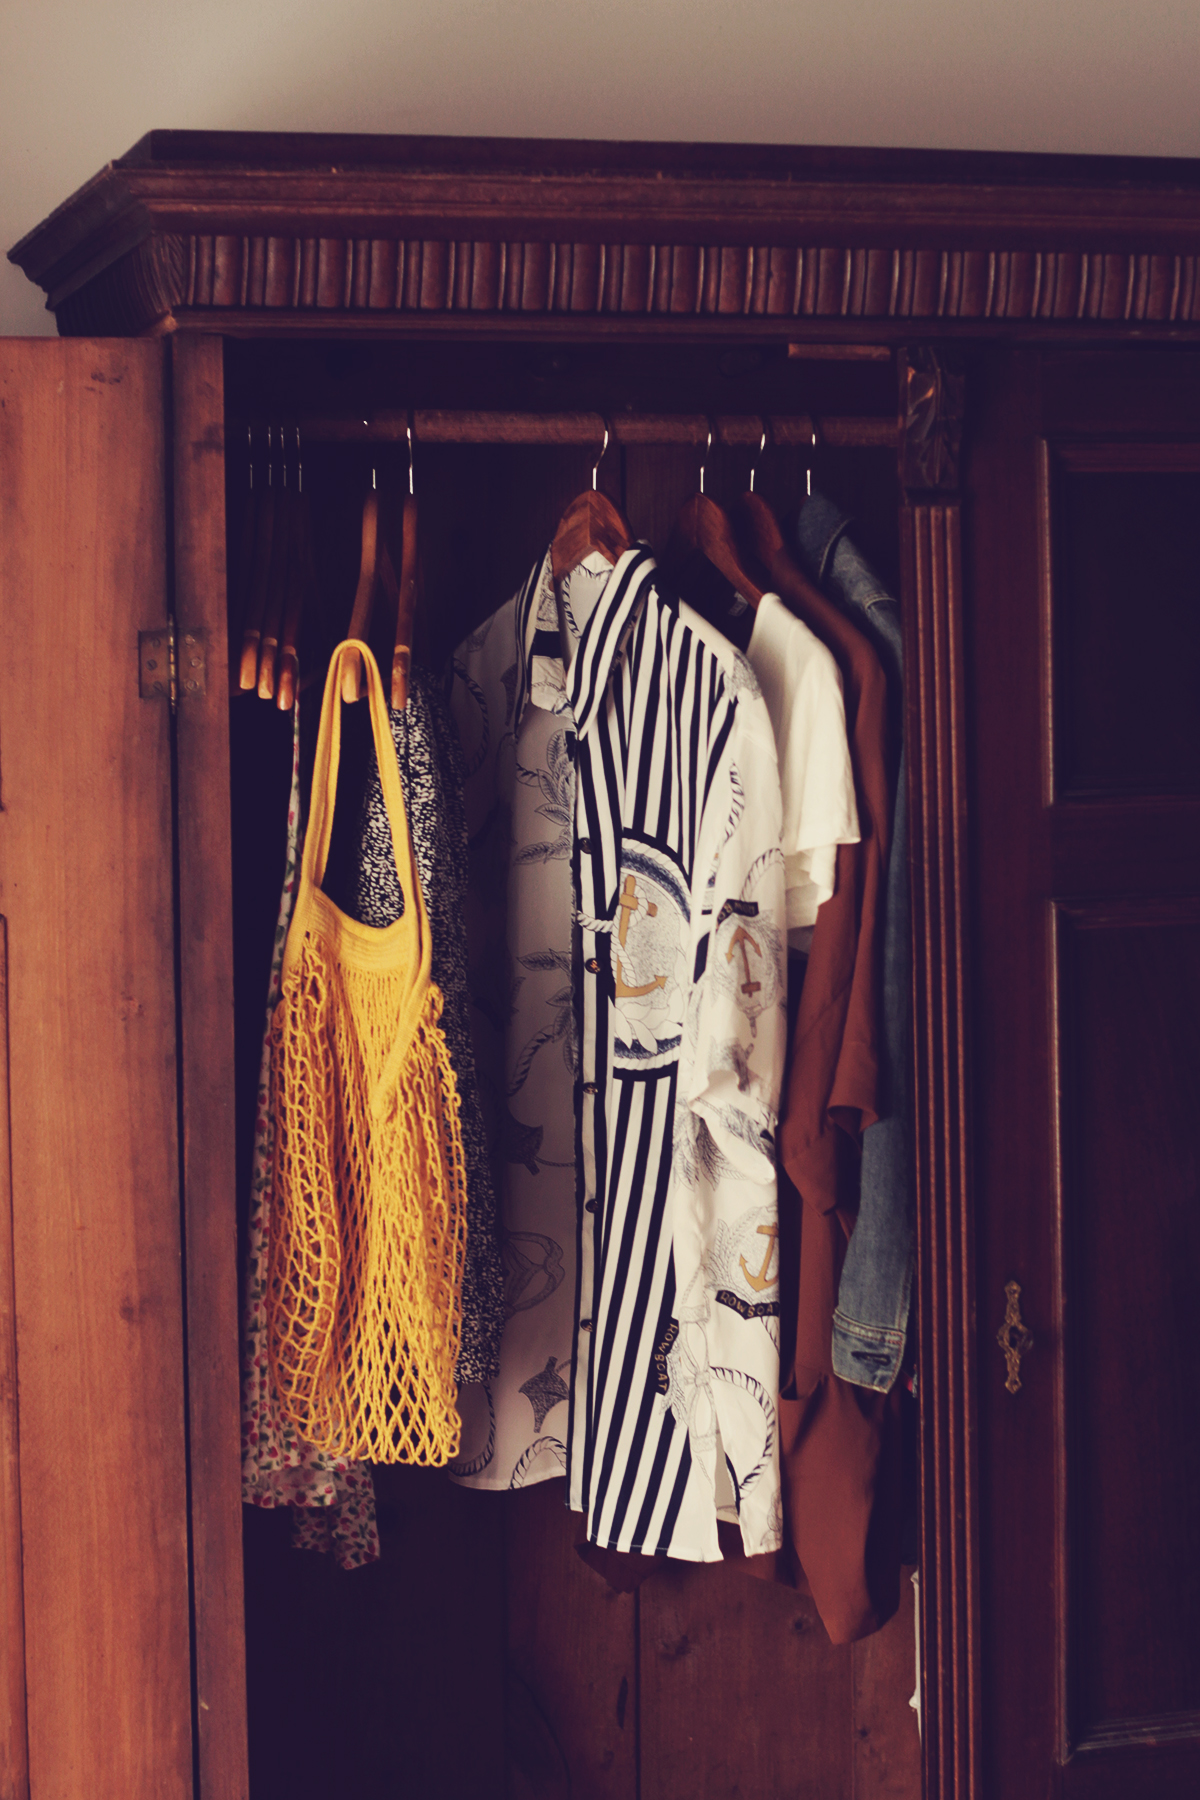 old mansion, wooden closet, vintage shirt, clothes in a wooden closet, net bag